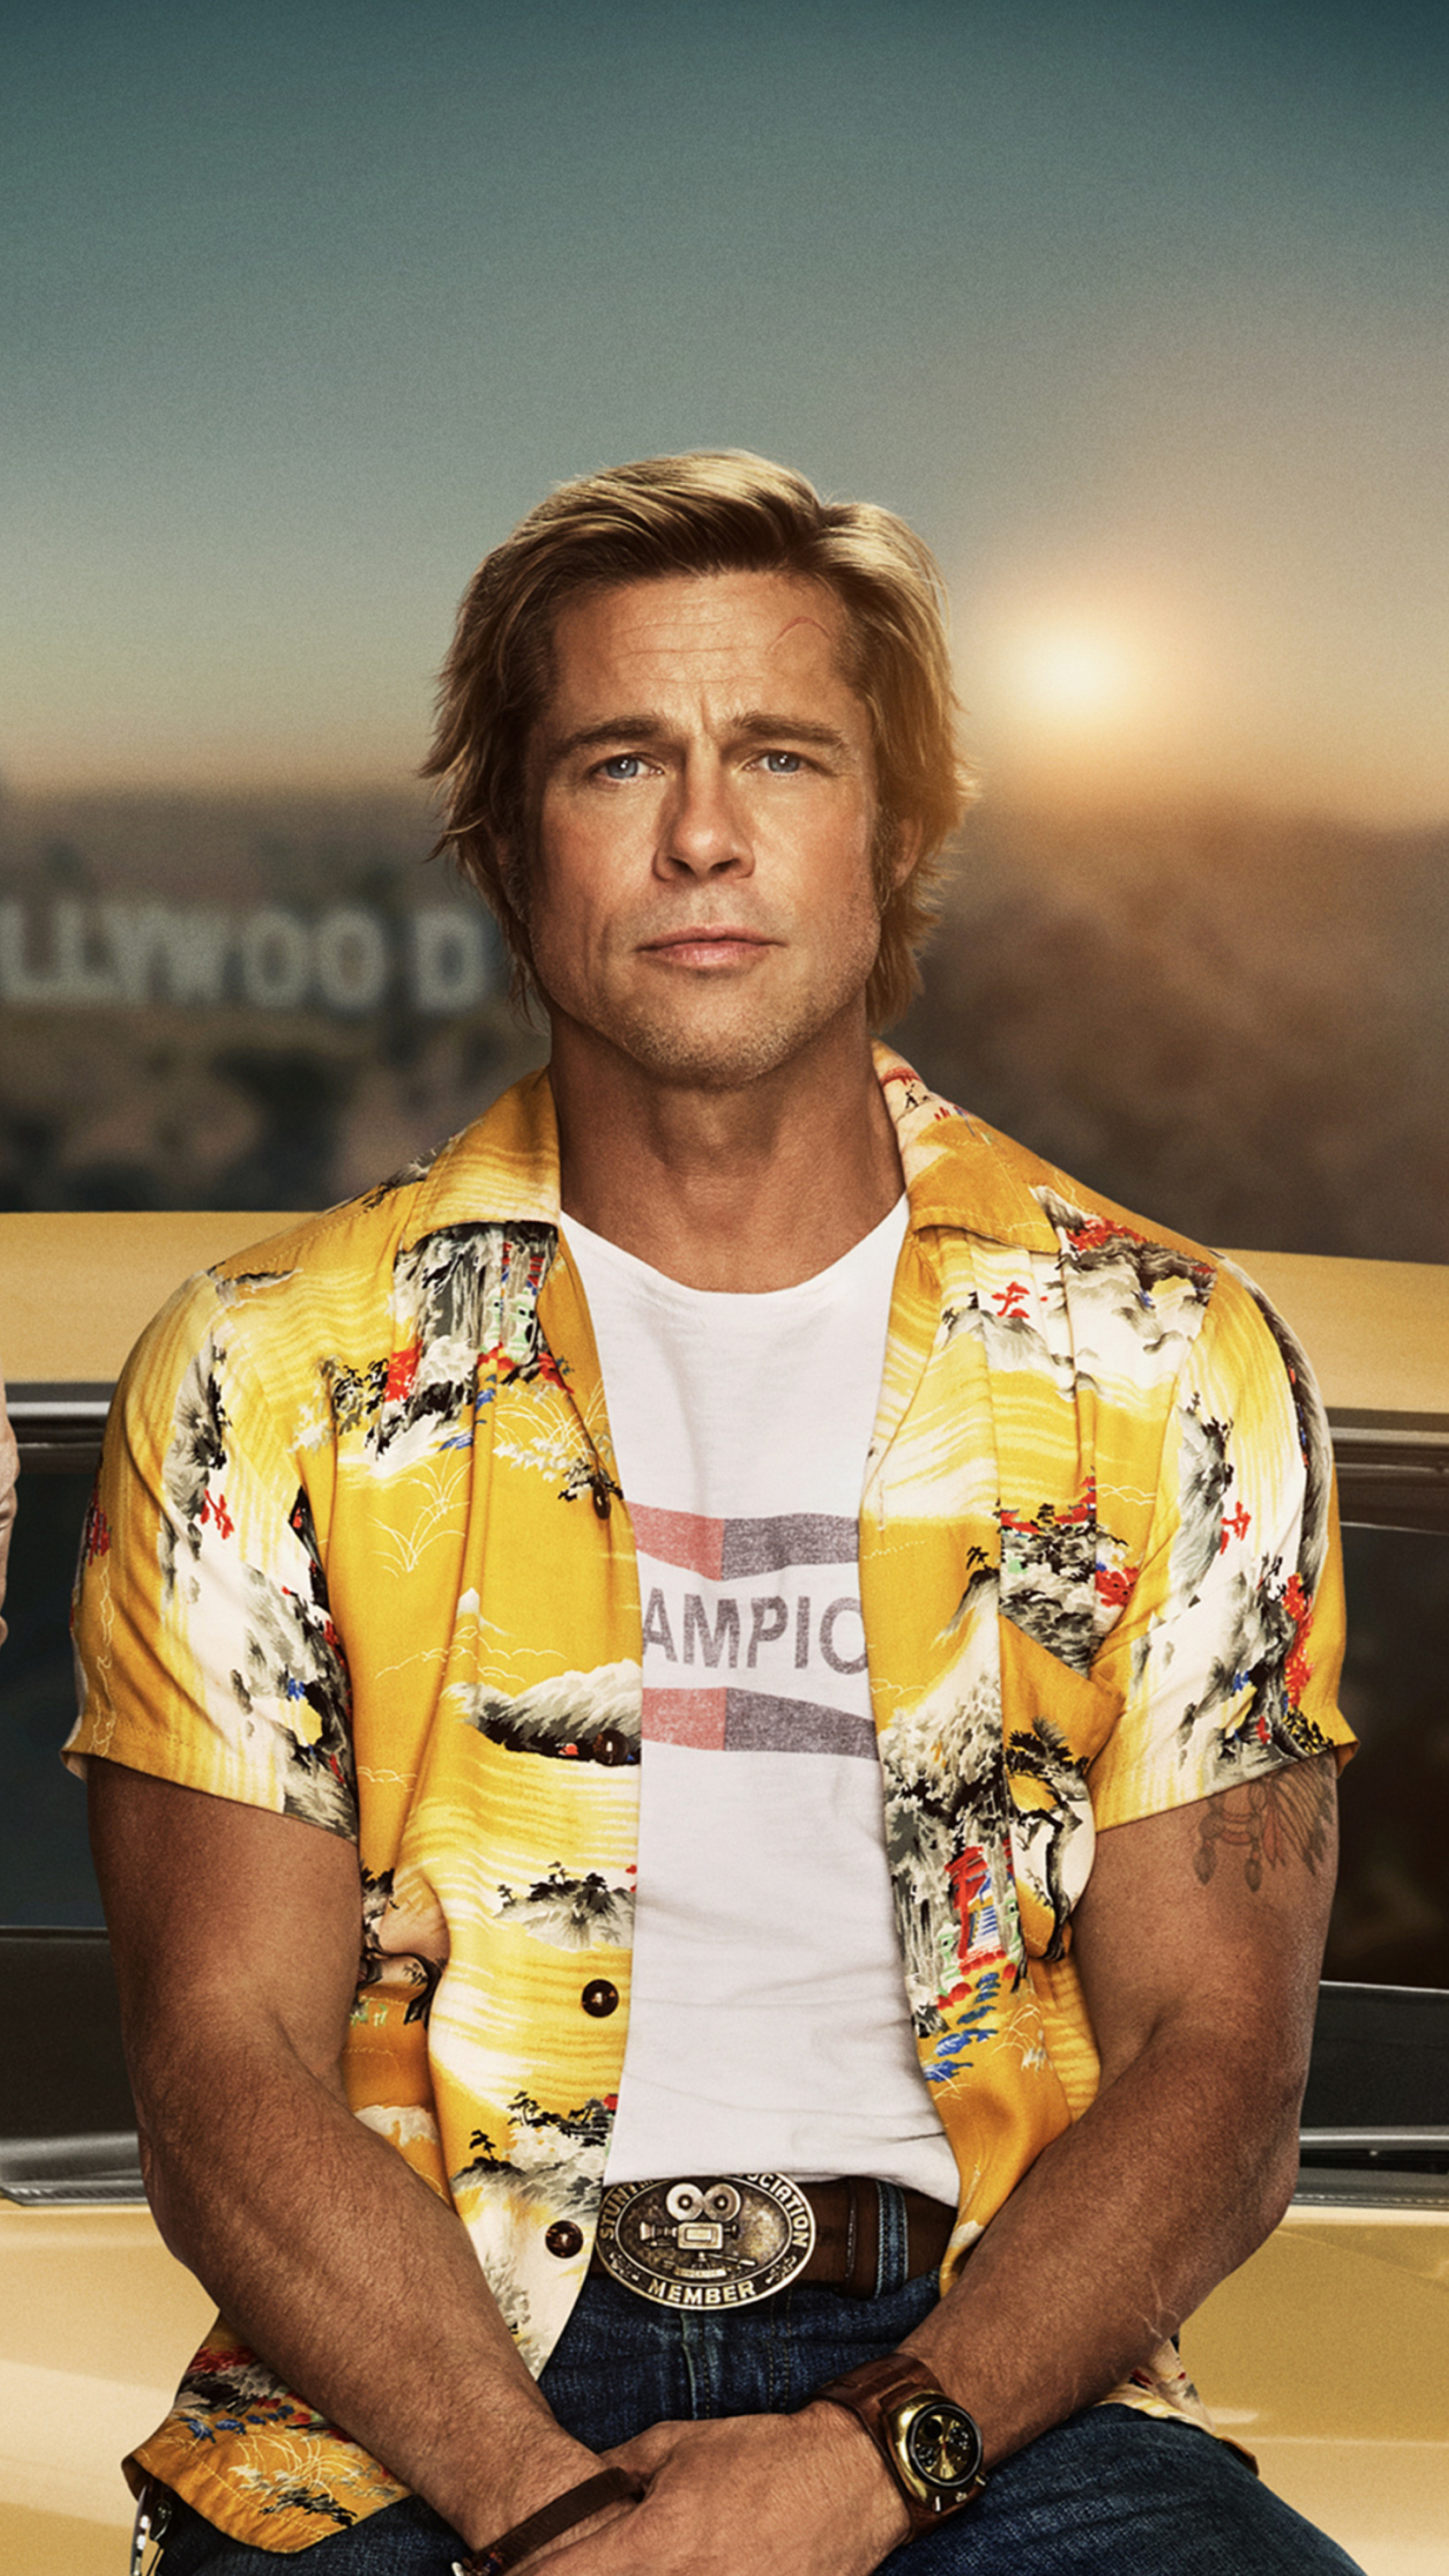 Once Upon a Time in Hollywood, 2020 4K Sony Xperia, HD Wallpapers Images, 2160x3840 4K Handy